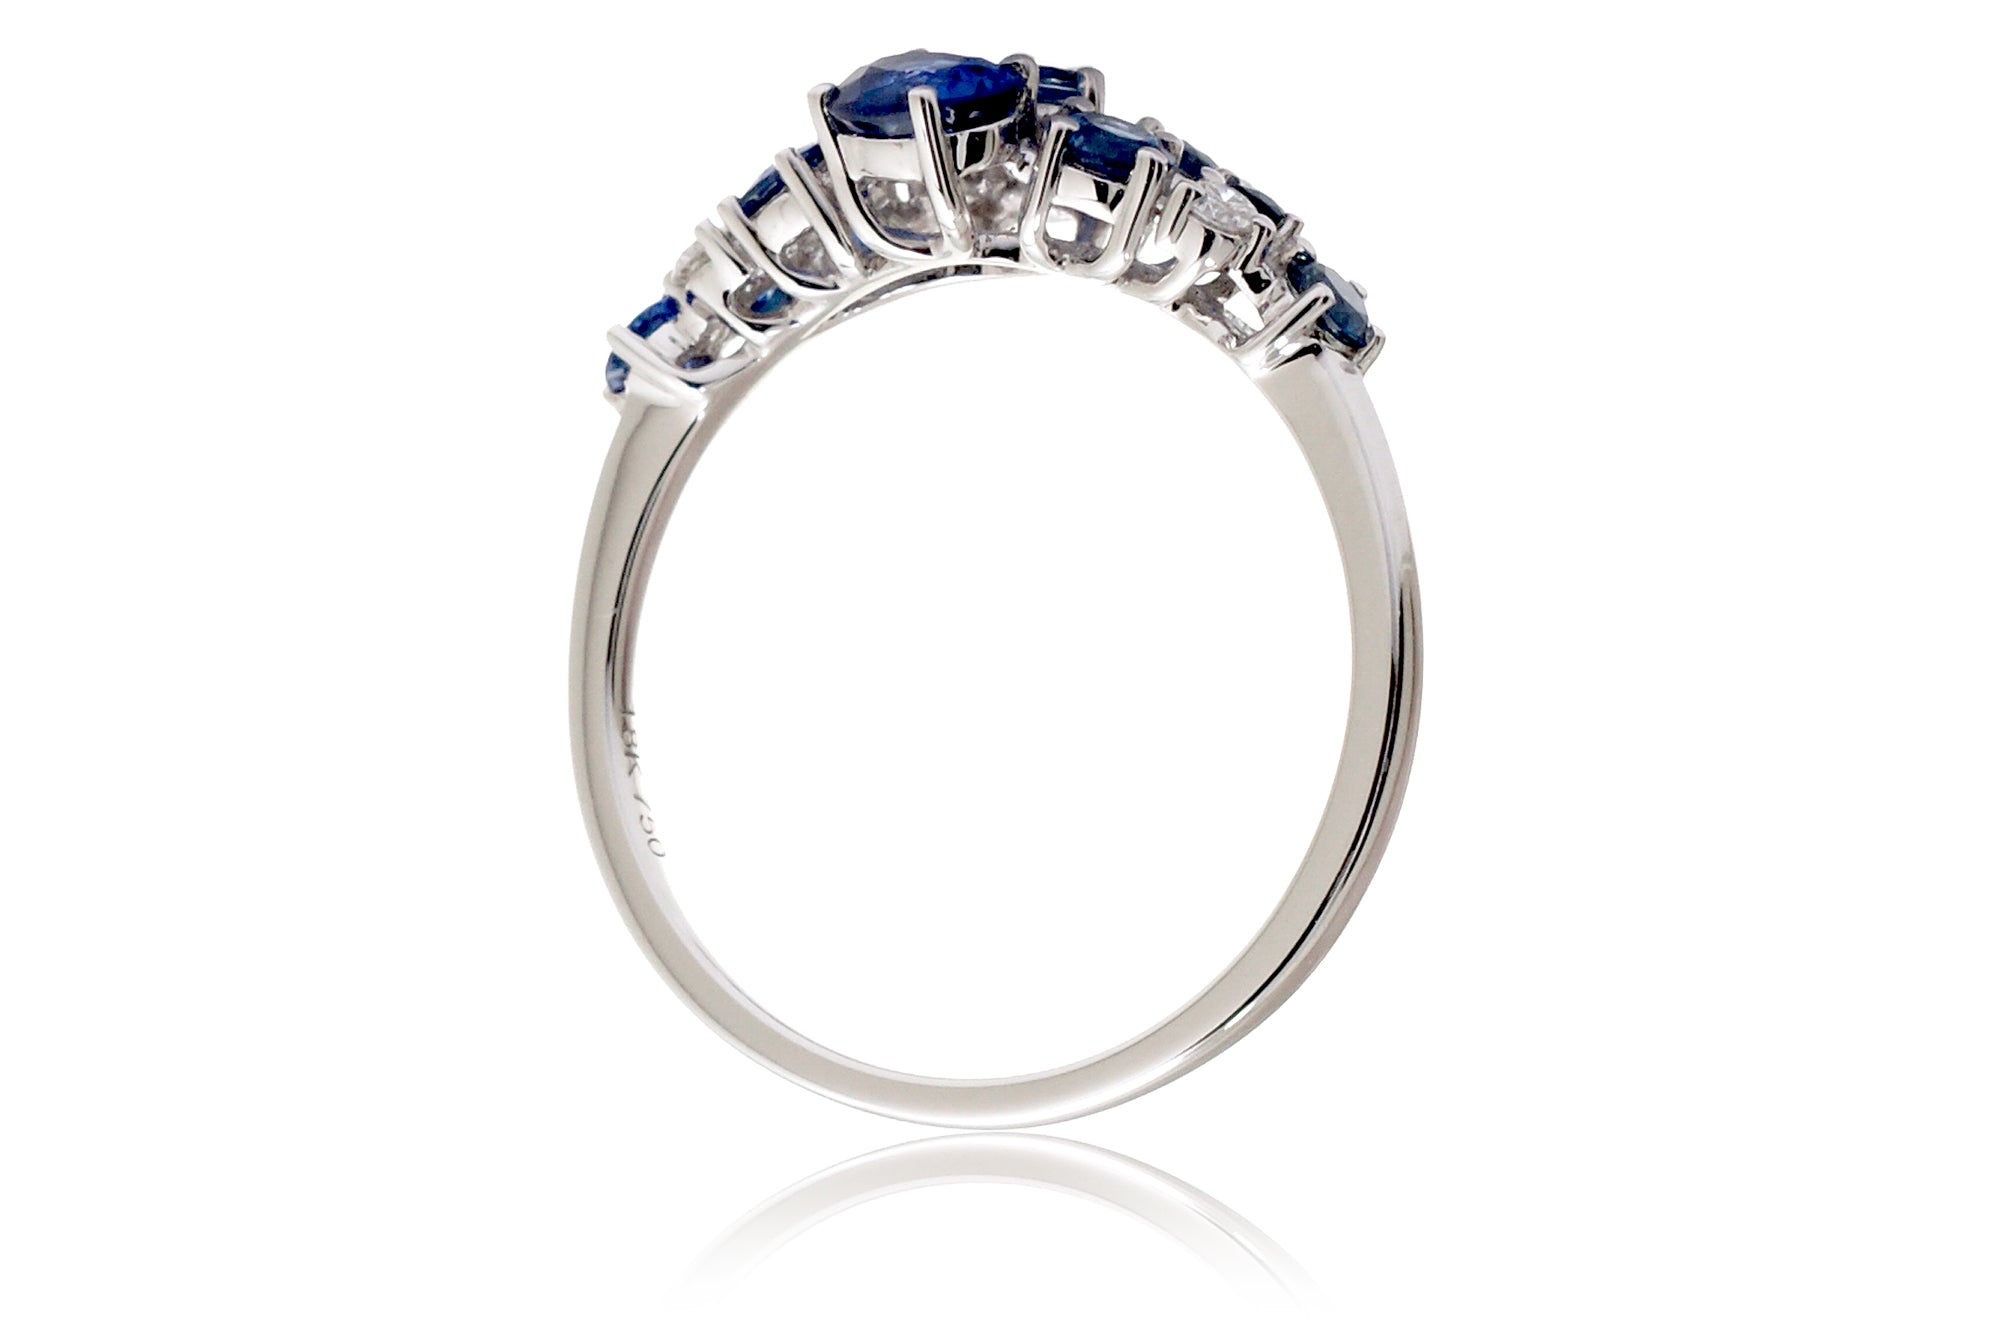 The Andromeda Blue Sapphire Ring